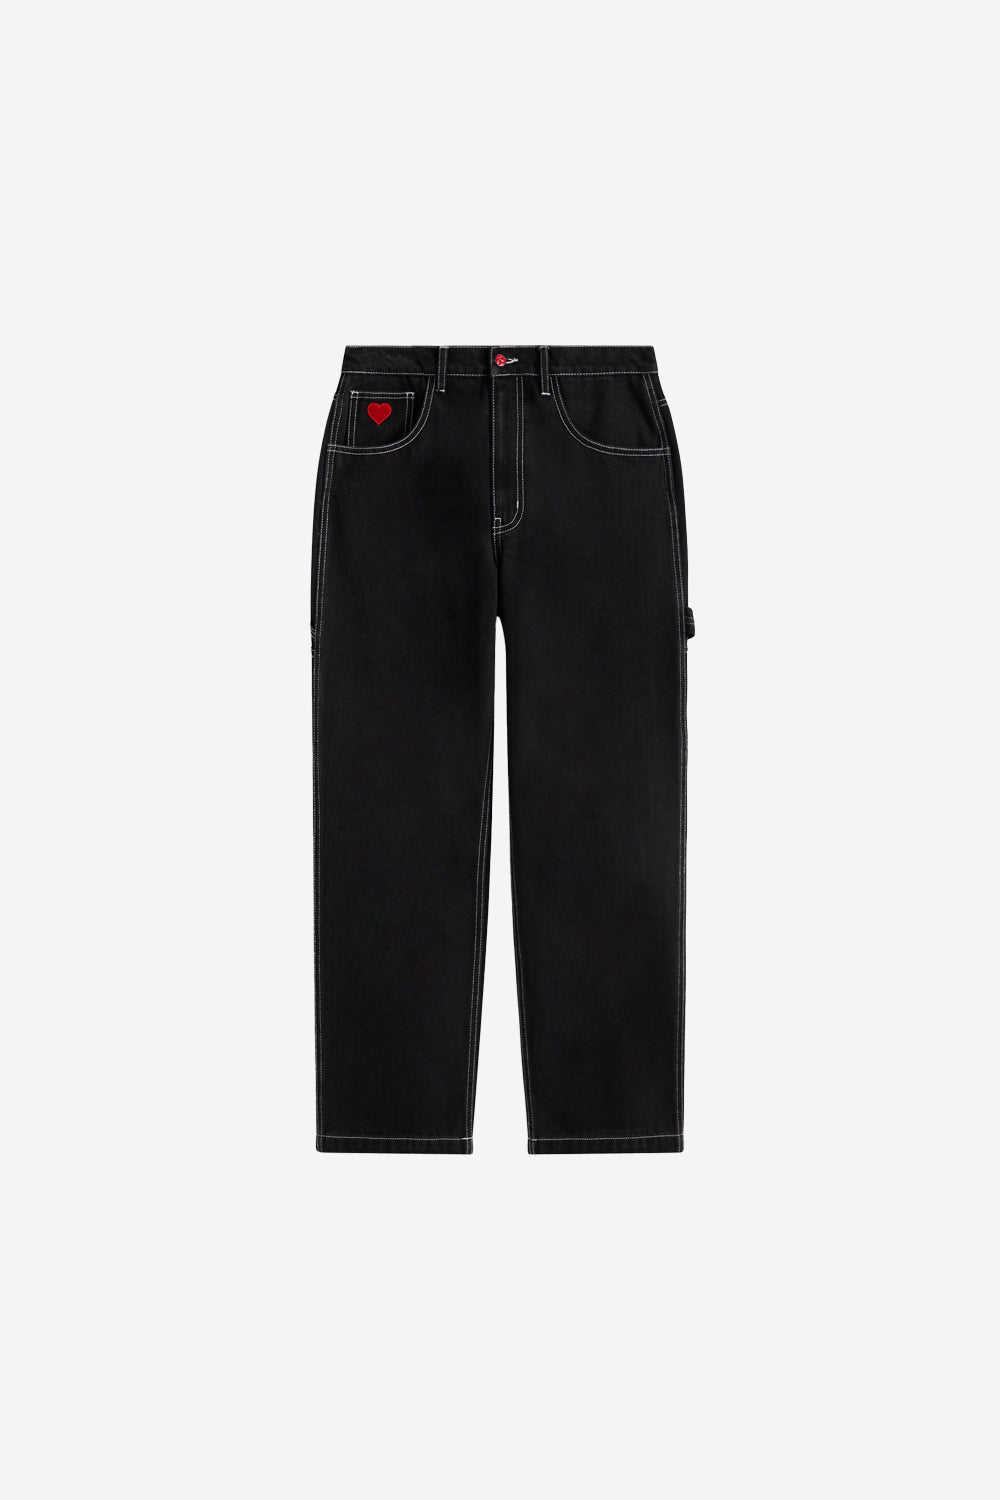 STRAIGHT TO THE HEART JEANS BLACK